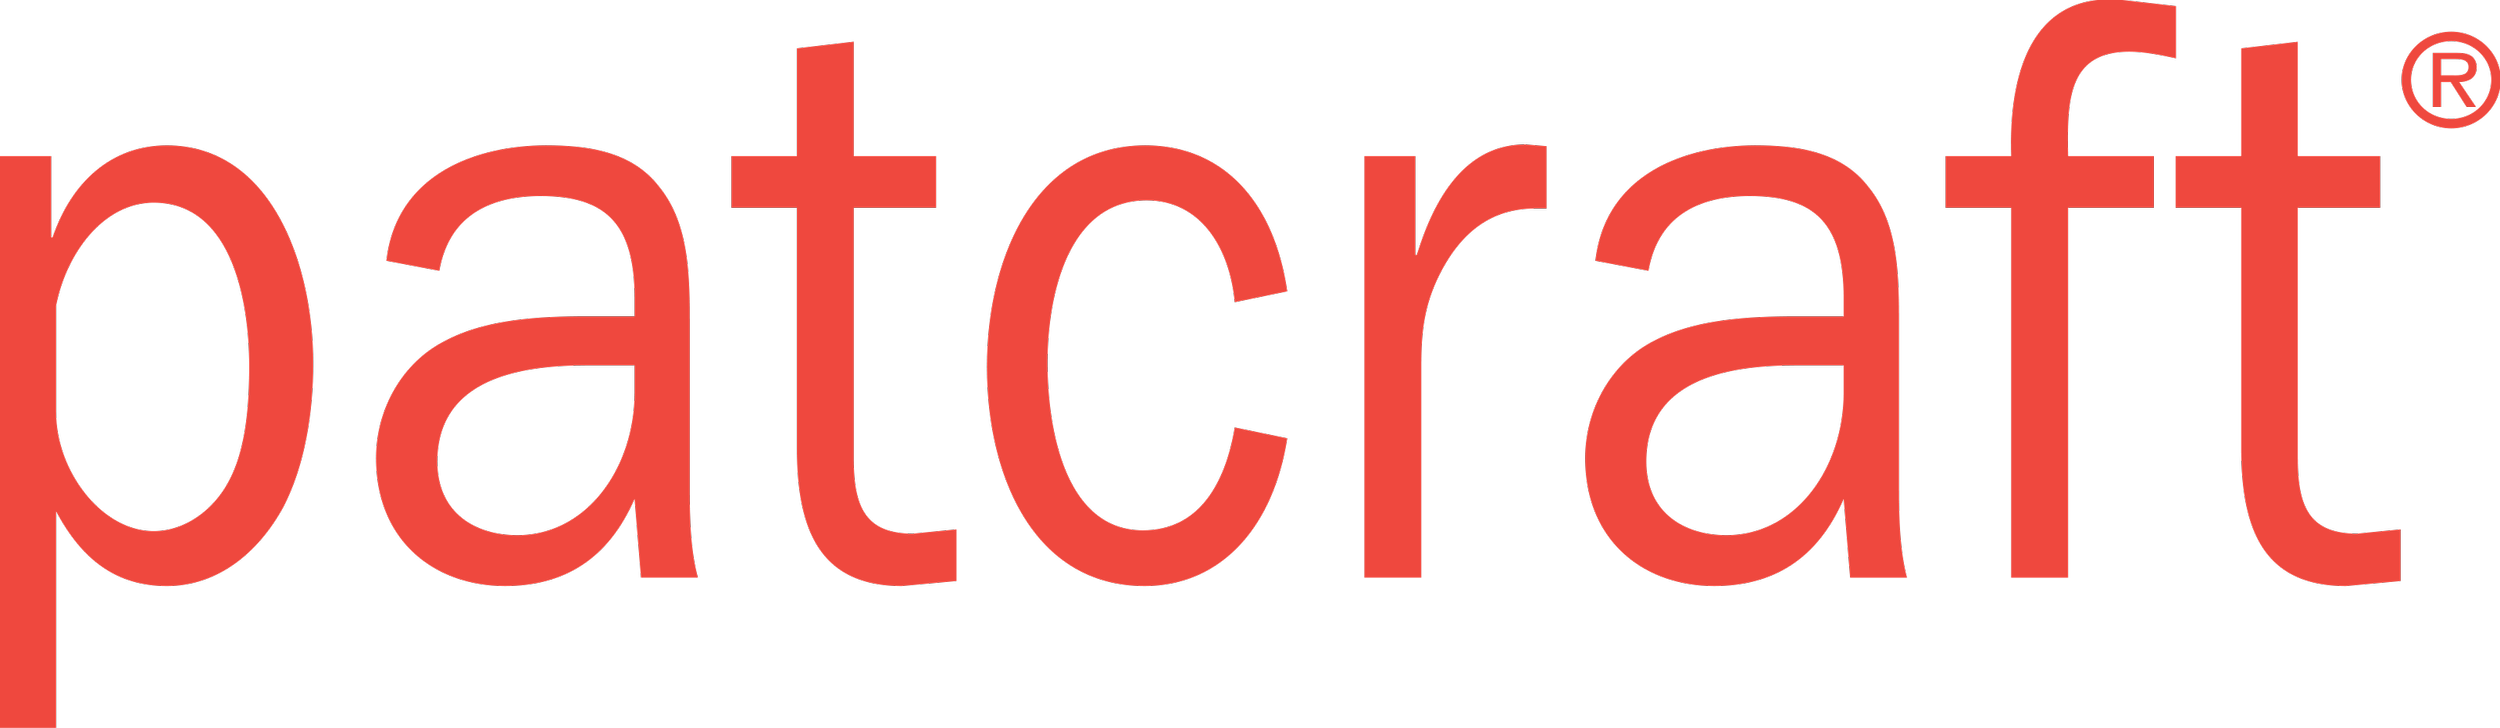 Copy of Patcraft_logo_warmred_HR.png